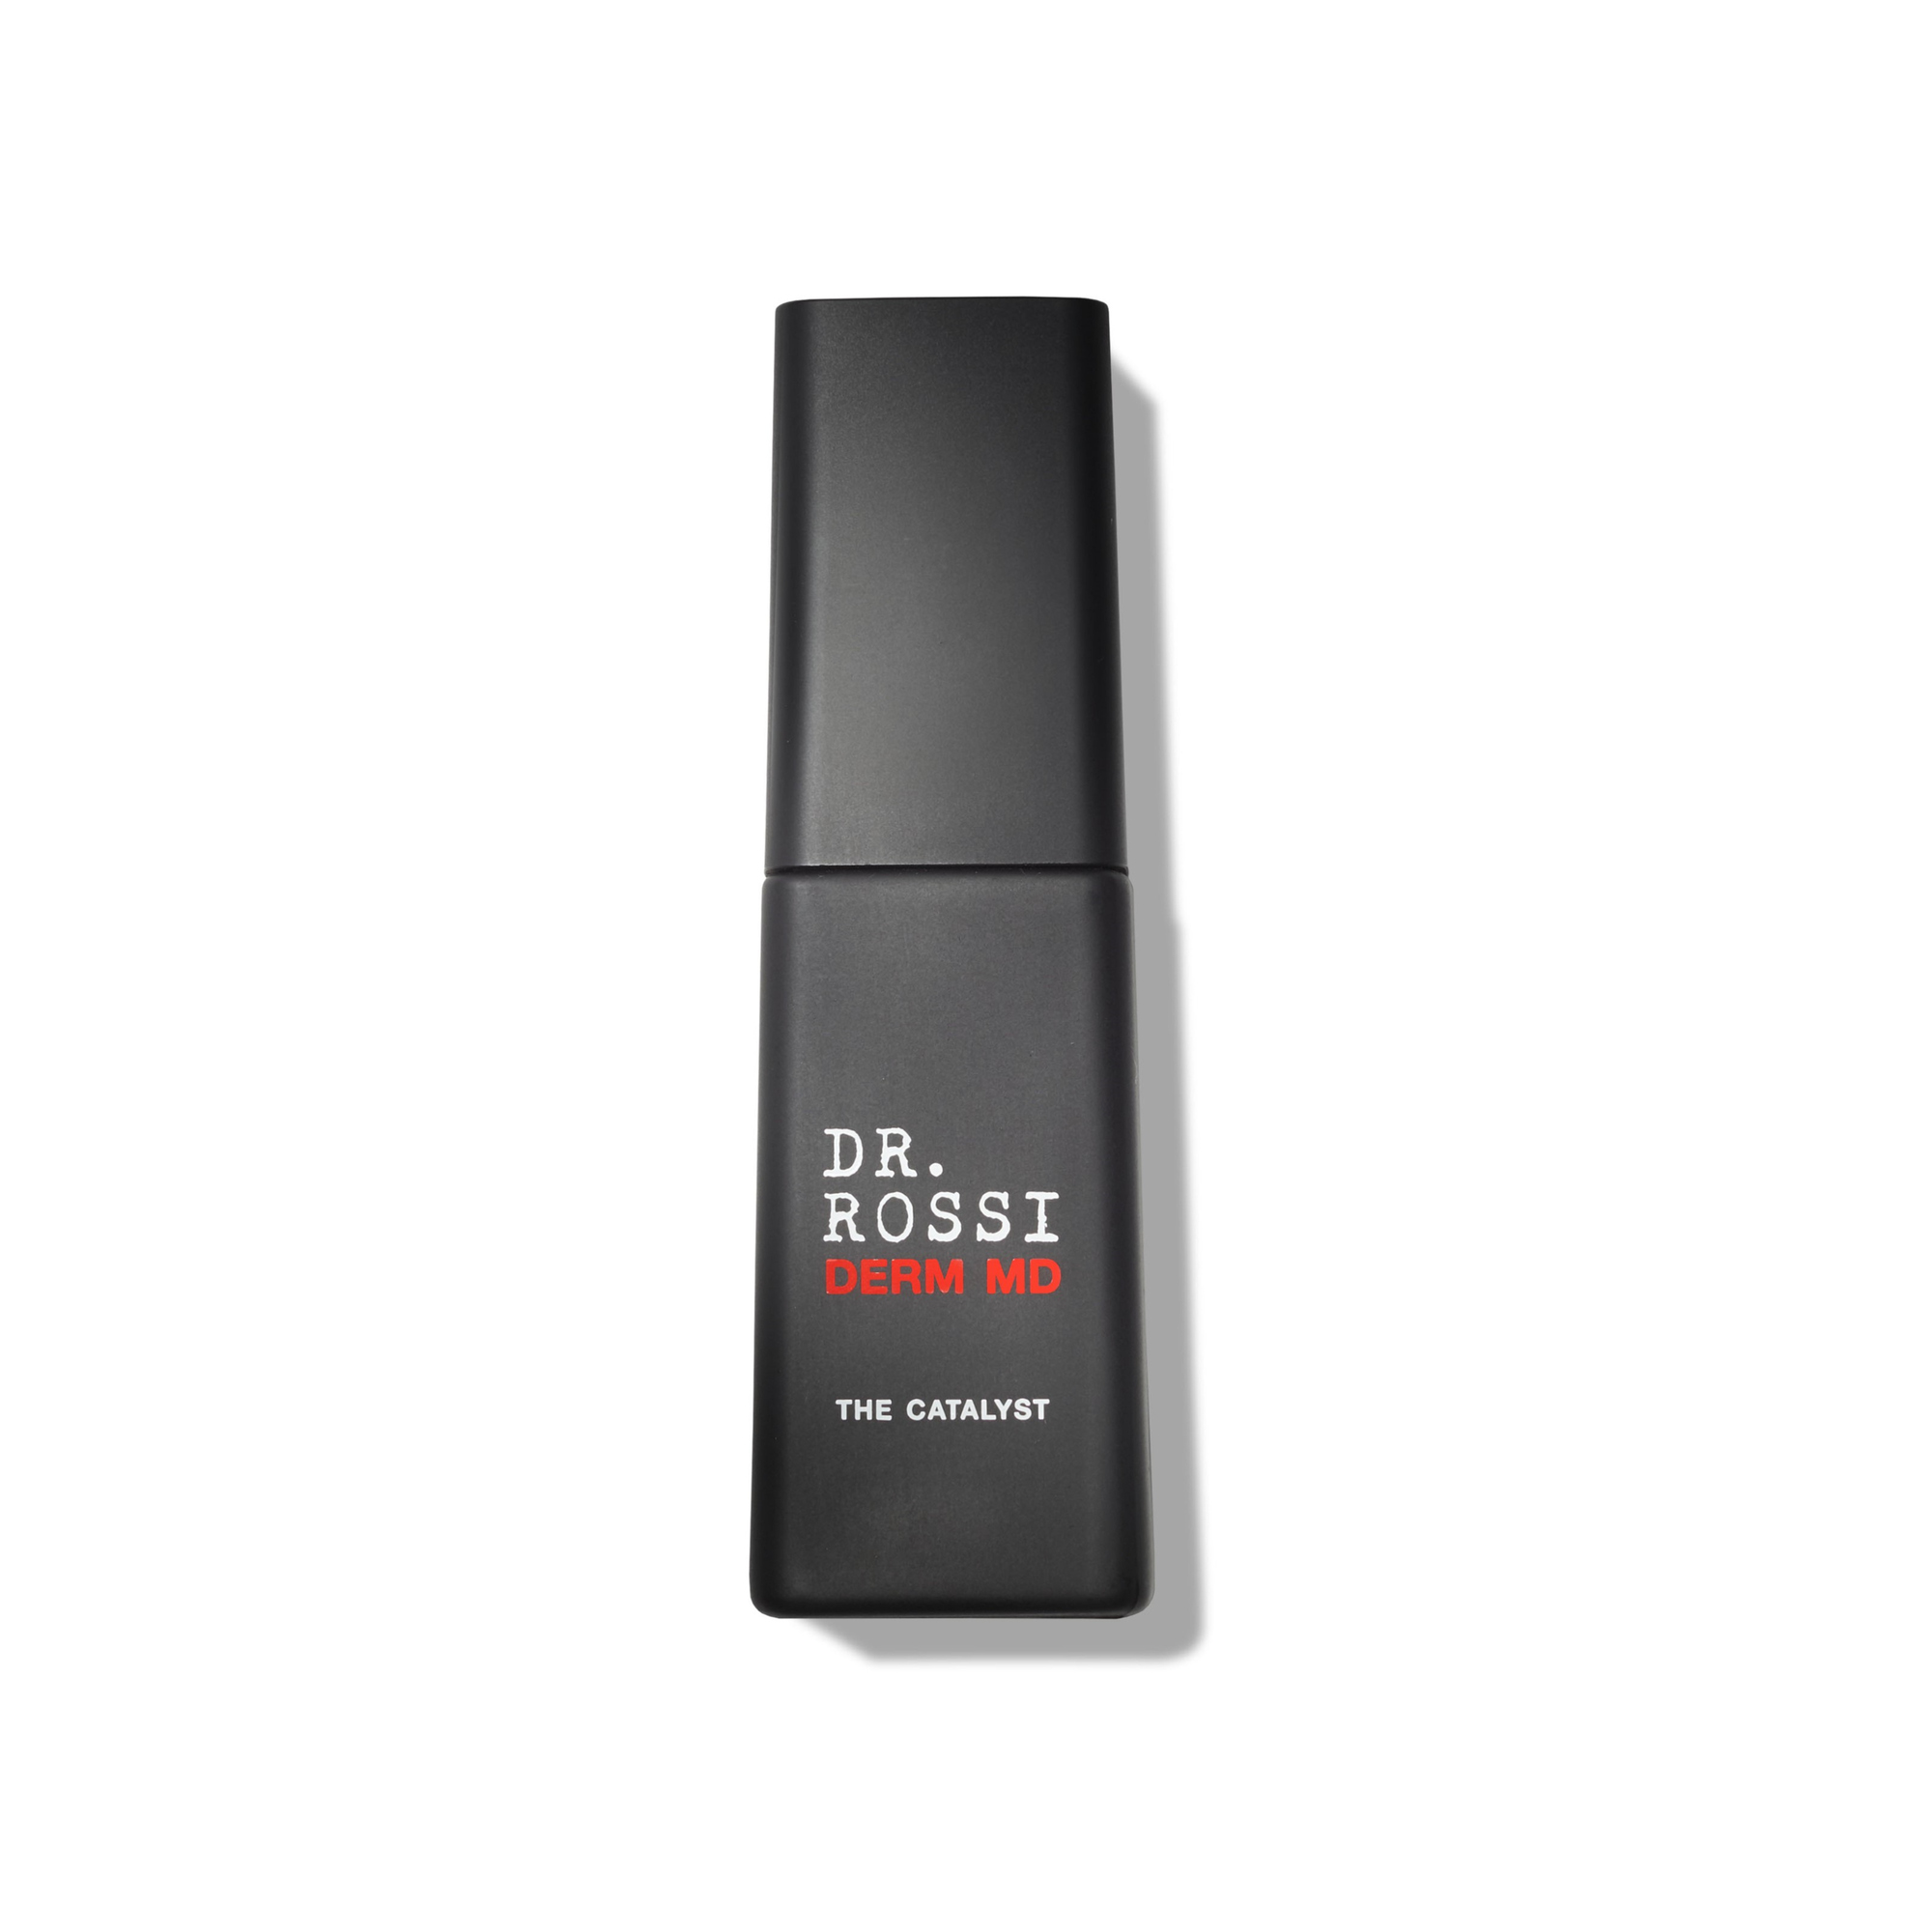 Dr. Rossi Derm MD The Catalyst age-defying serum in black bottle on white background